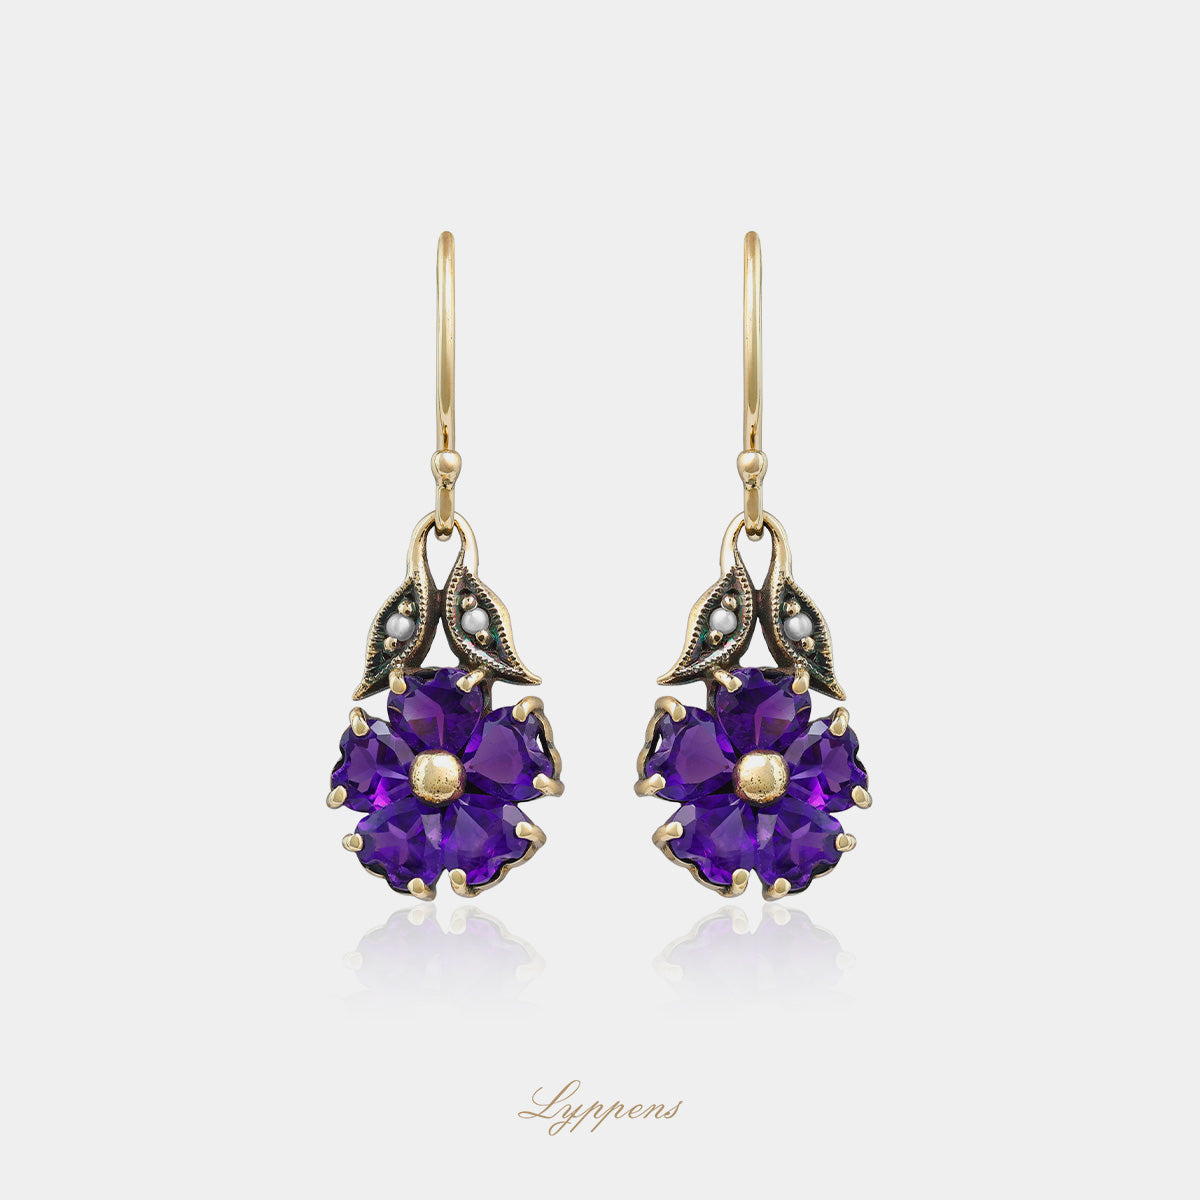 Yellow gold drop earrings with amethyst and pearls